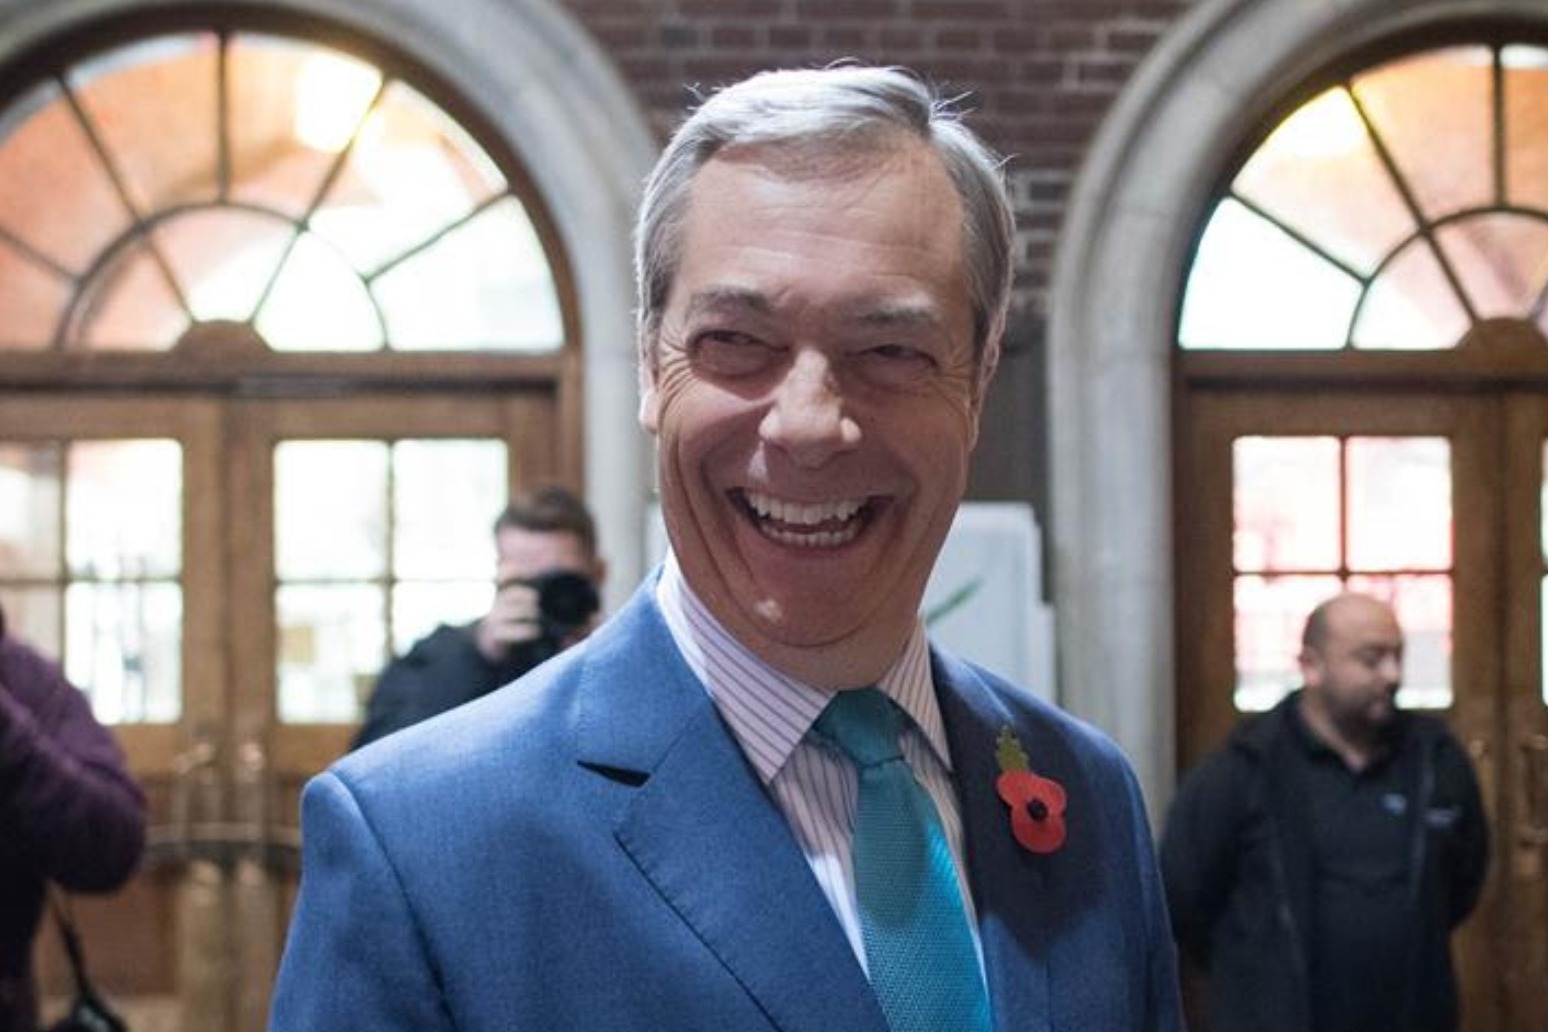 NIGEL FARAGE FACES CALLS NOT TO CONTEST FURTHER SEATS 